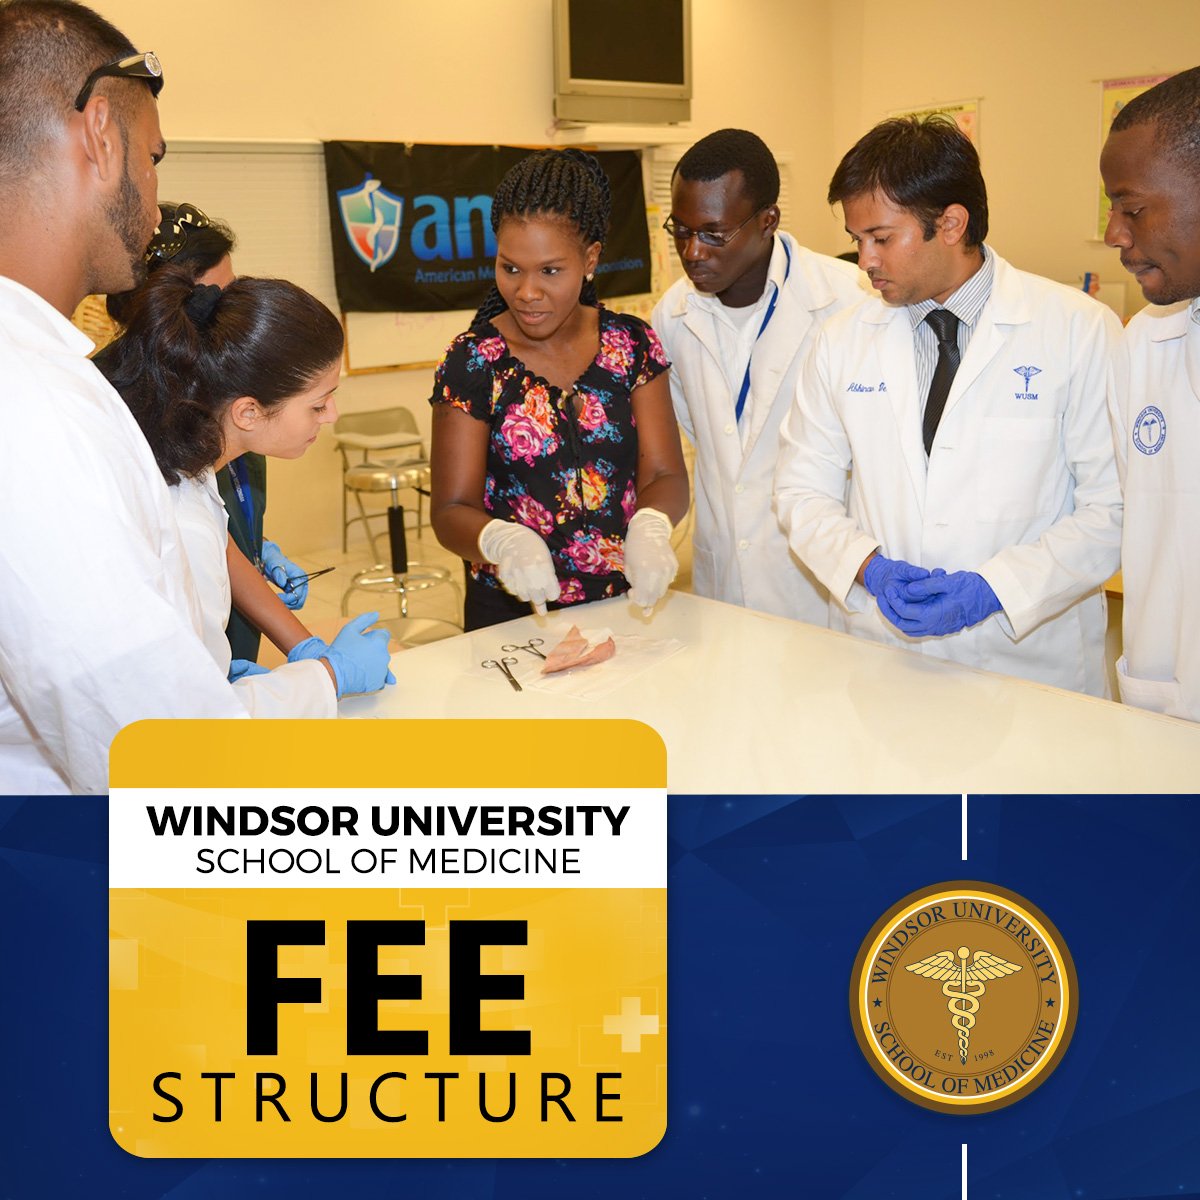 We offer quality medical education at the most affordable tuition price of any accredited medical school. Learn more about our fee structure:
windsor.edu/admissions/tui…

#Tuition #Fees #CostofStudying #StudyMedicine #MedicalEducation #StudyAbroad